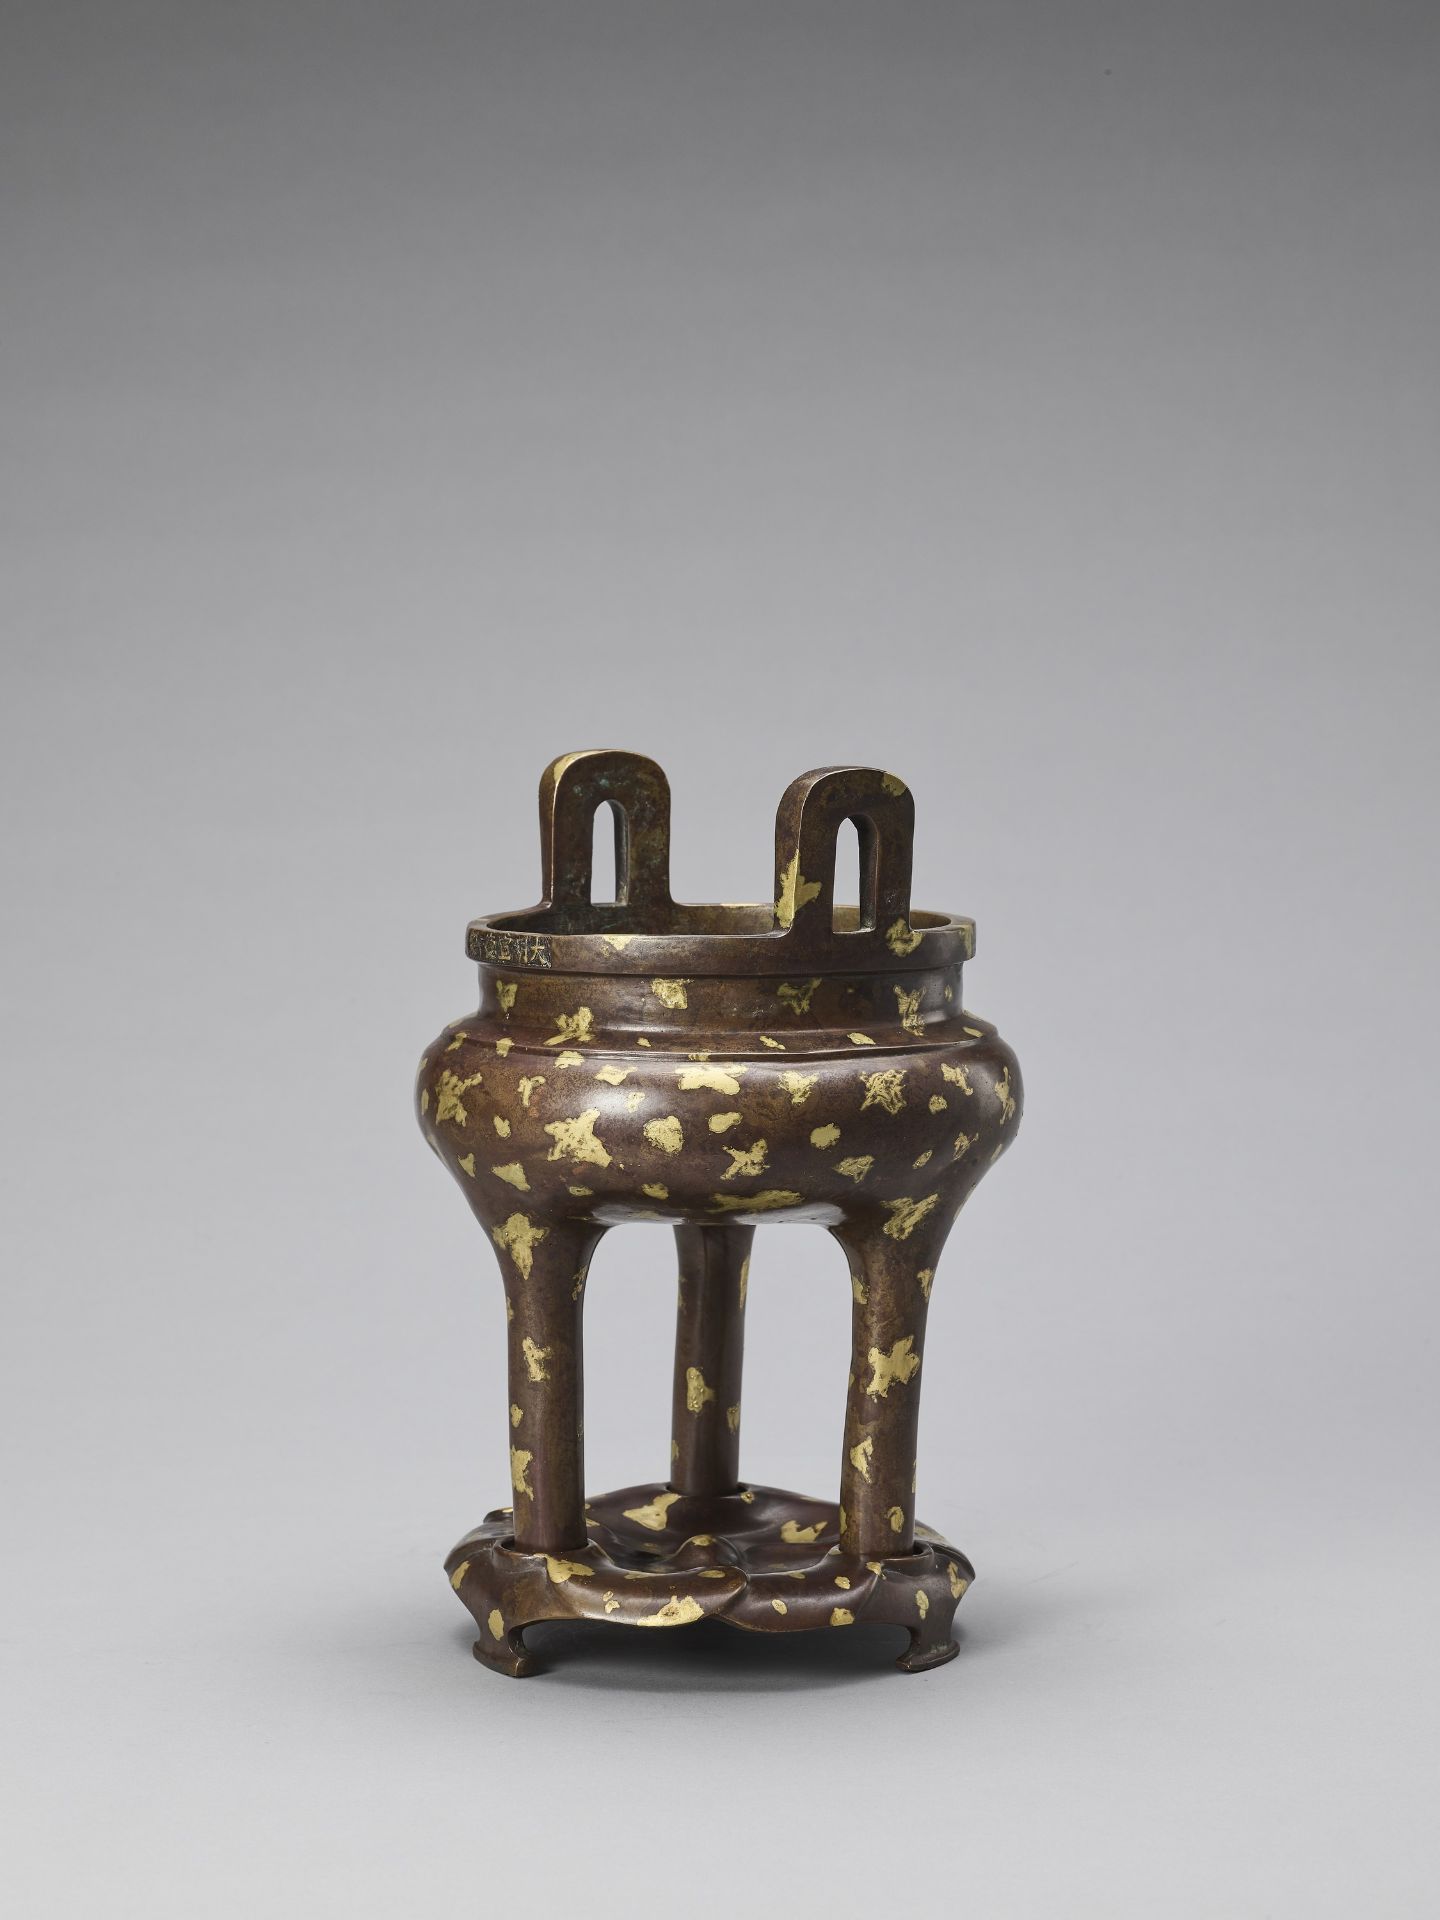 A GOLD-SPLASHED BRONZE TRIPOD CENSER WITH SIX-CHARACTER XUANDE MARK, QING - Image 3 of 8